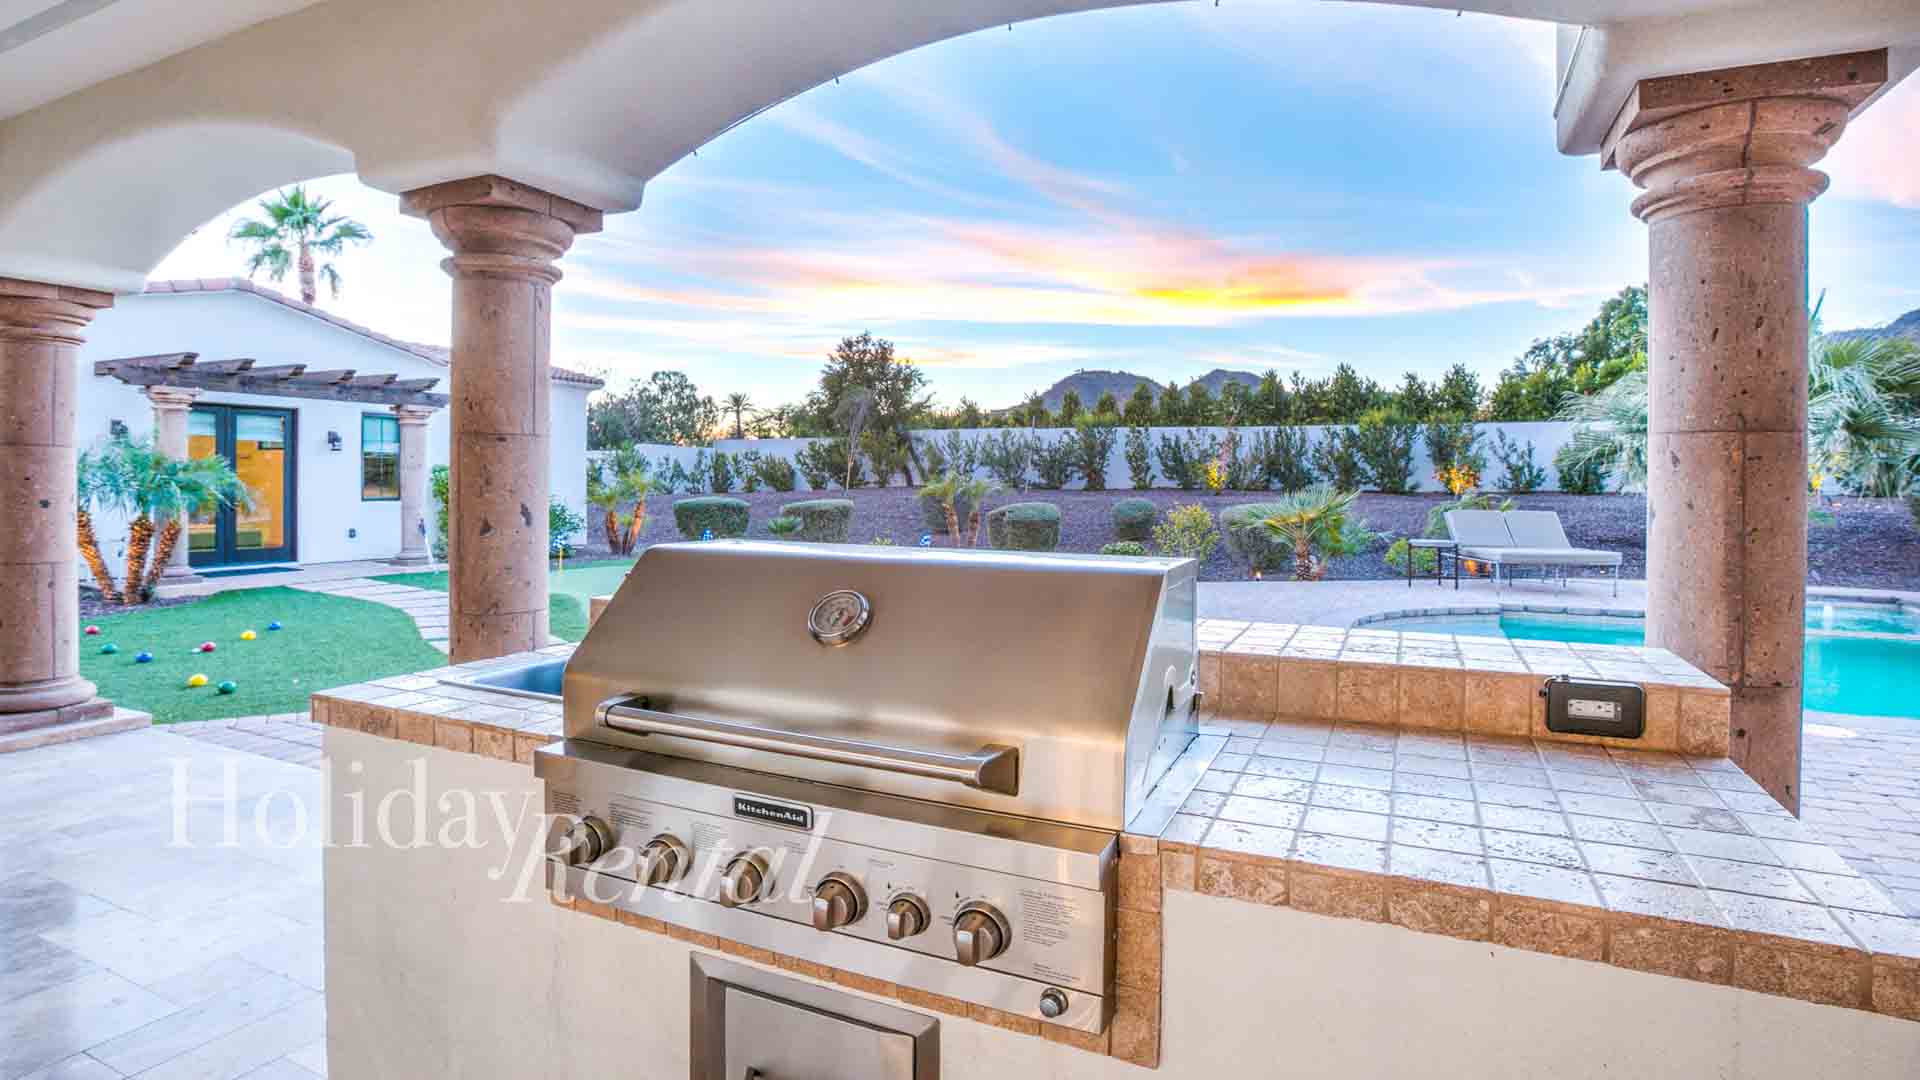 luxury vacation rental pool side grill